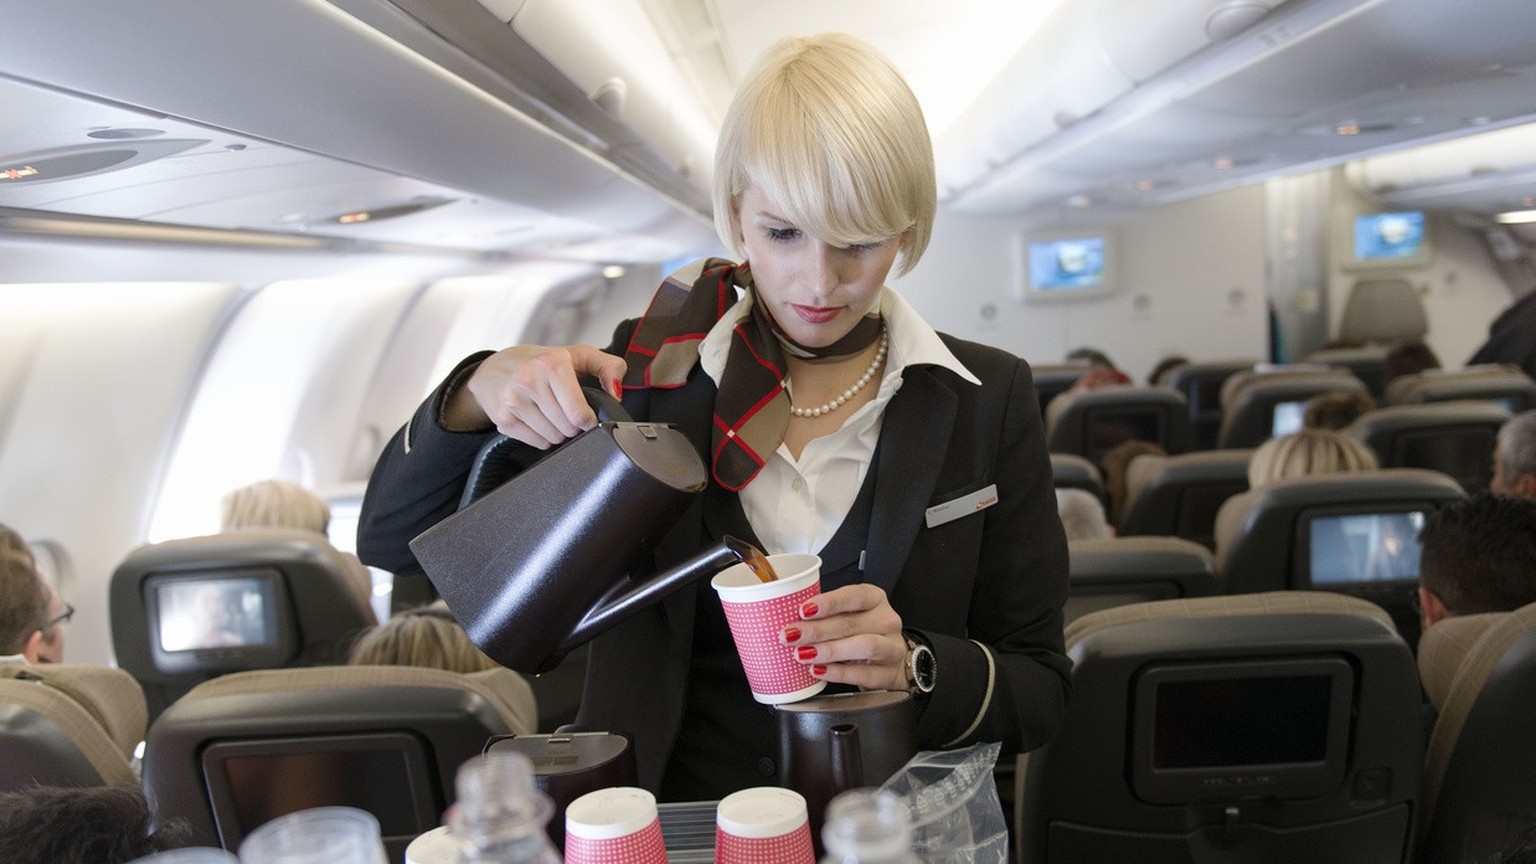 A flight attendant attends to the passengers of the Economy Class, pictured on April 29, 2013 in an aircraft of Swiss. Swiss, short for Swiss International Air Lines, flies from Zurich to Chicago and  ...